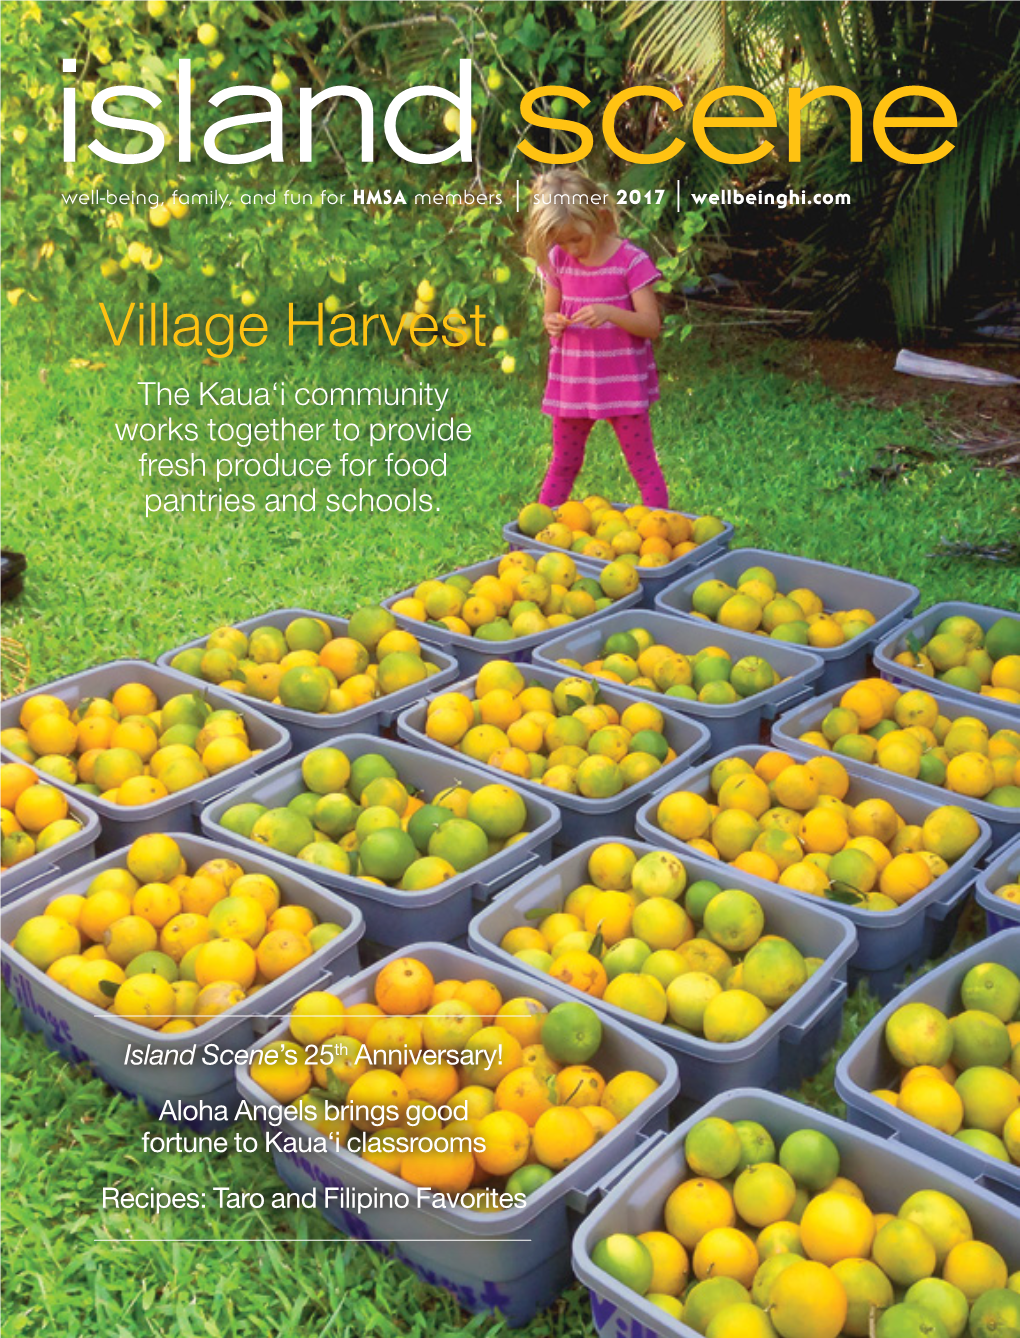 Village Harvest the Kaua‘I Community Works Together to Provide Fresh Produce for Food Pantries and Schools